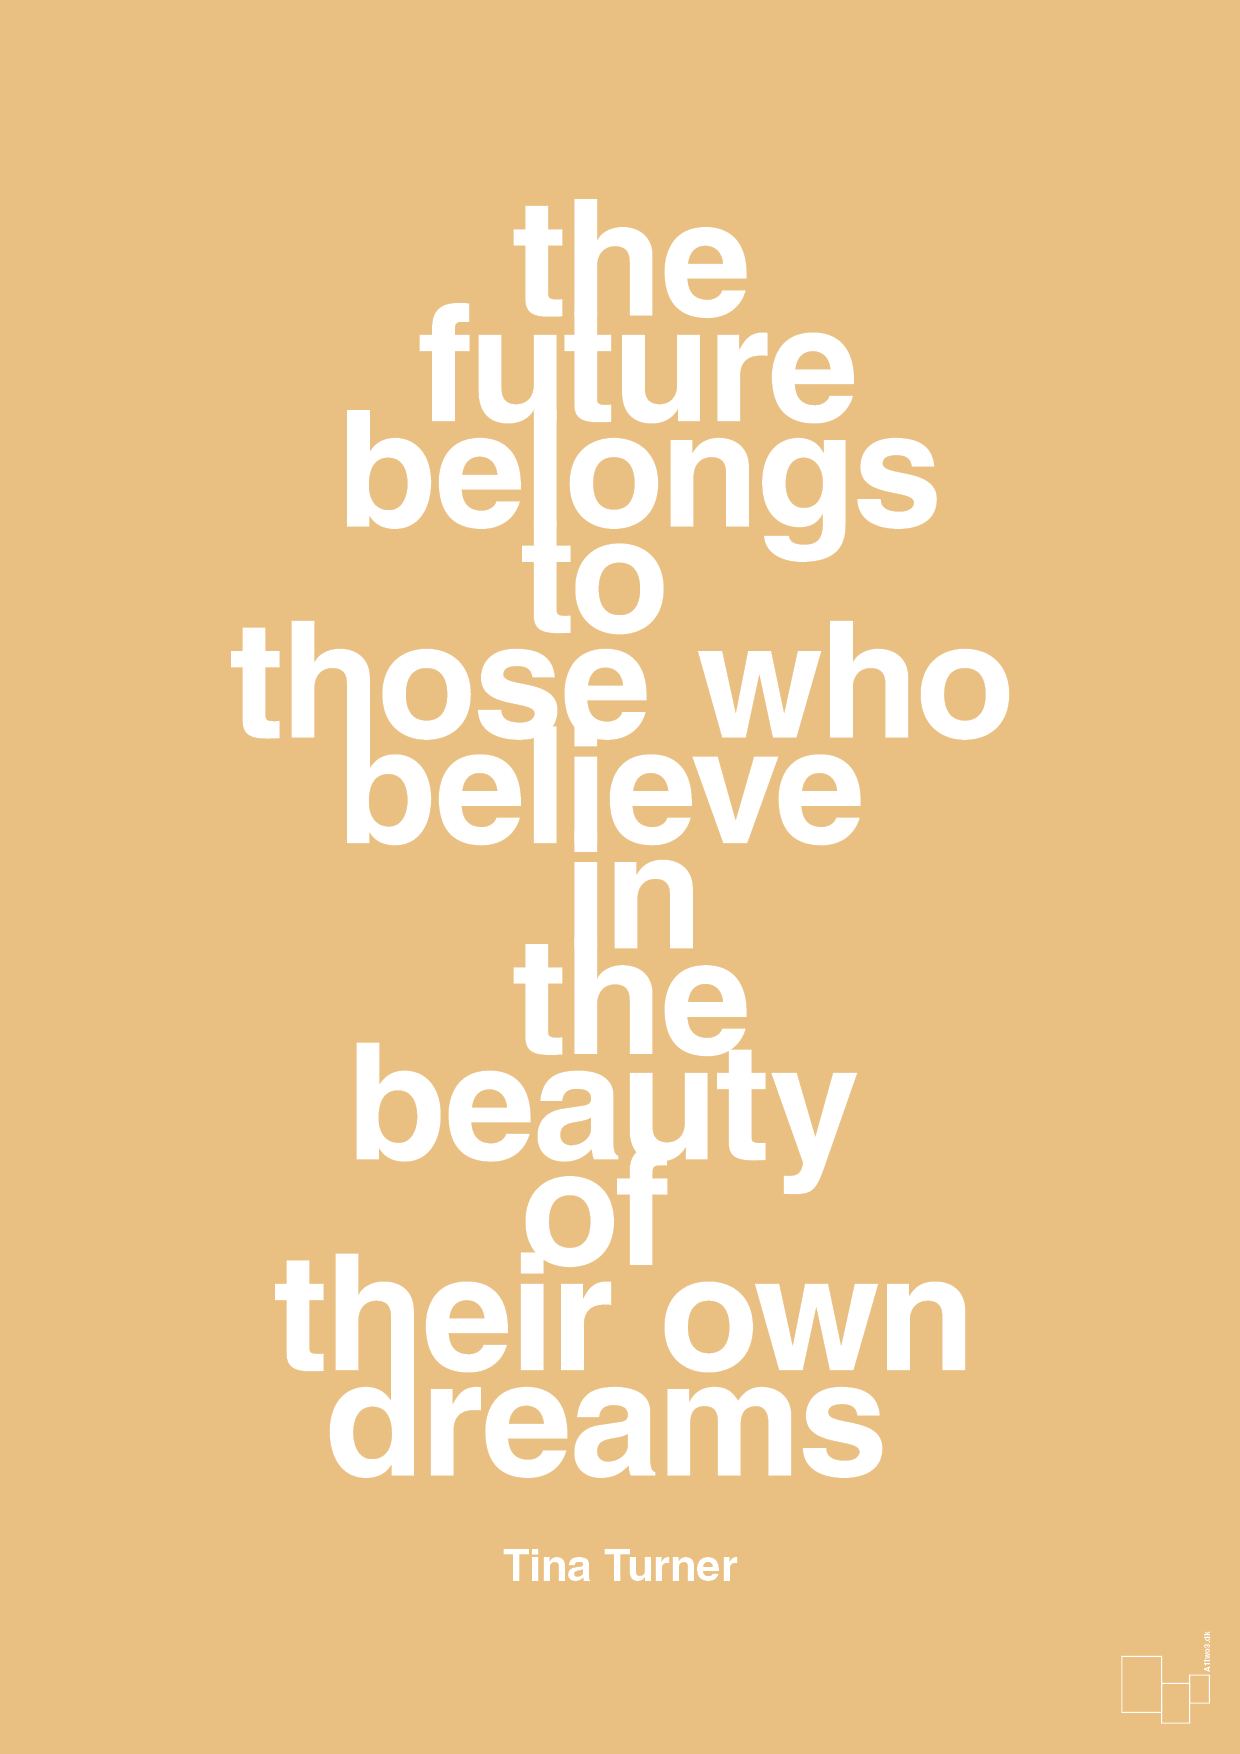 the future belongs to those who believe in the beauty of their own dreams - Plakat med Citater i Charismatic